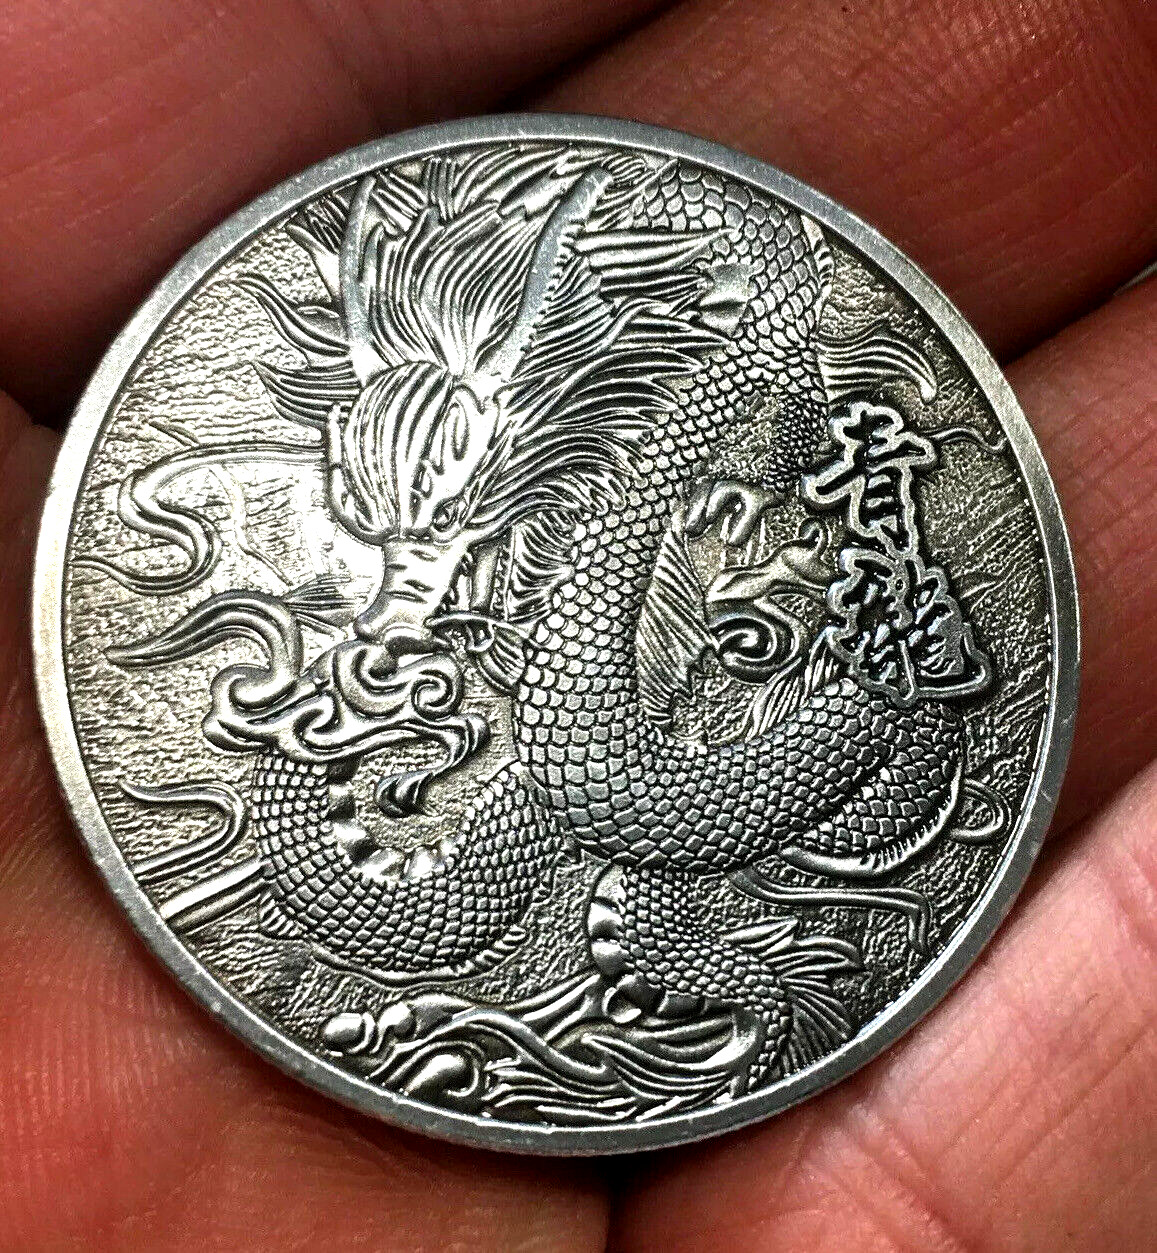 RARE LUCKY DRAGON Novelty Heads Tails Challenge Coin #323